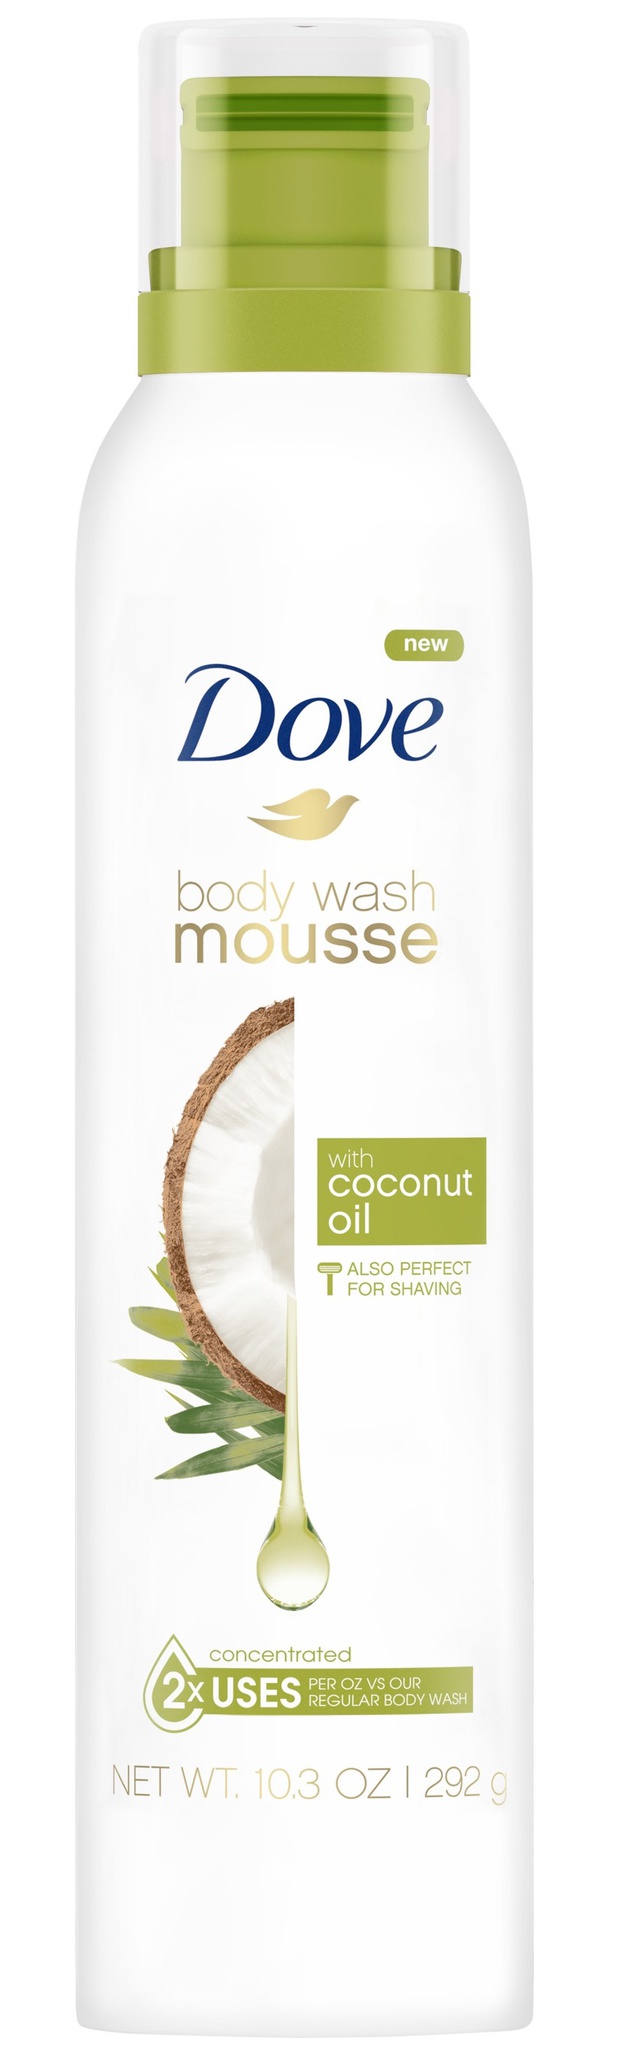 Dove Body Wash Mousse With Coconut Oil